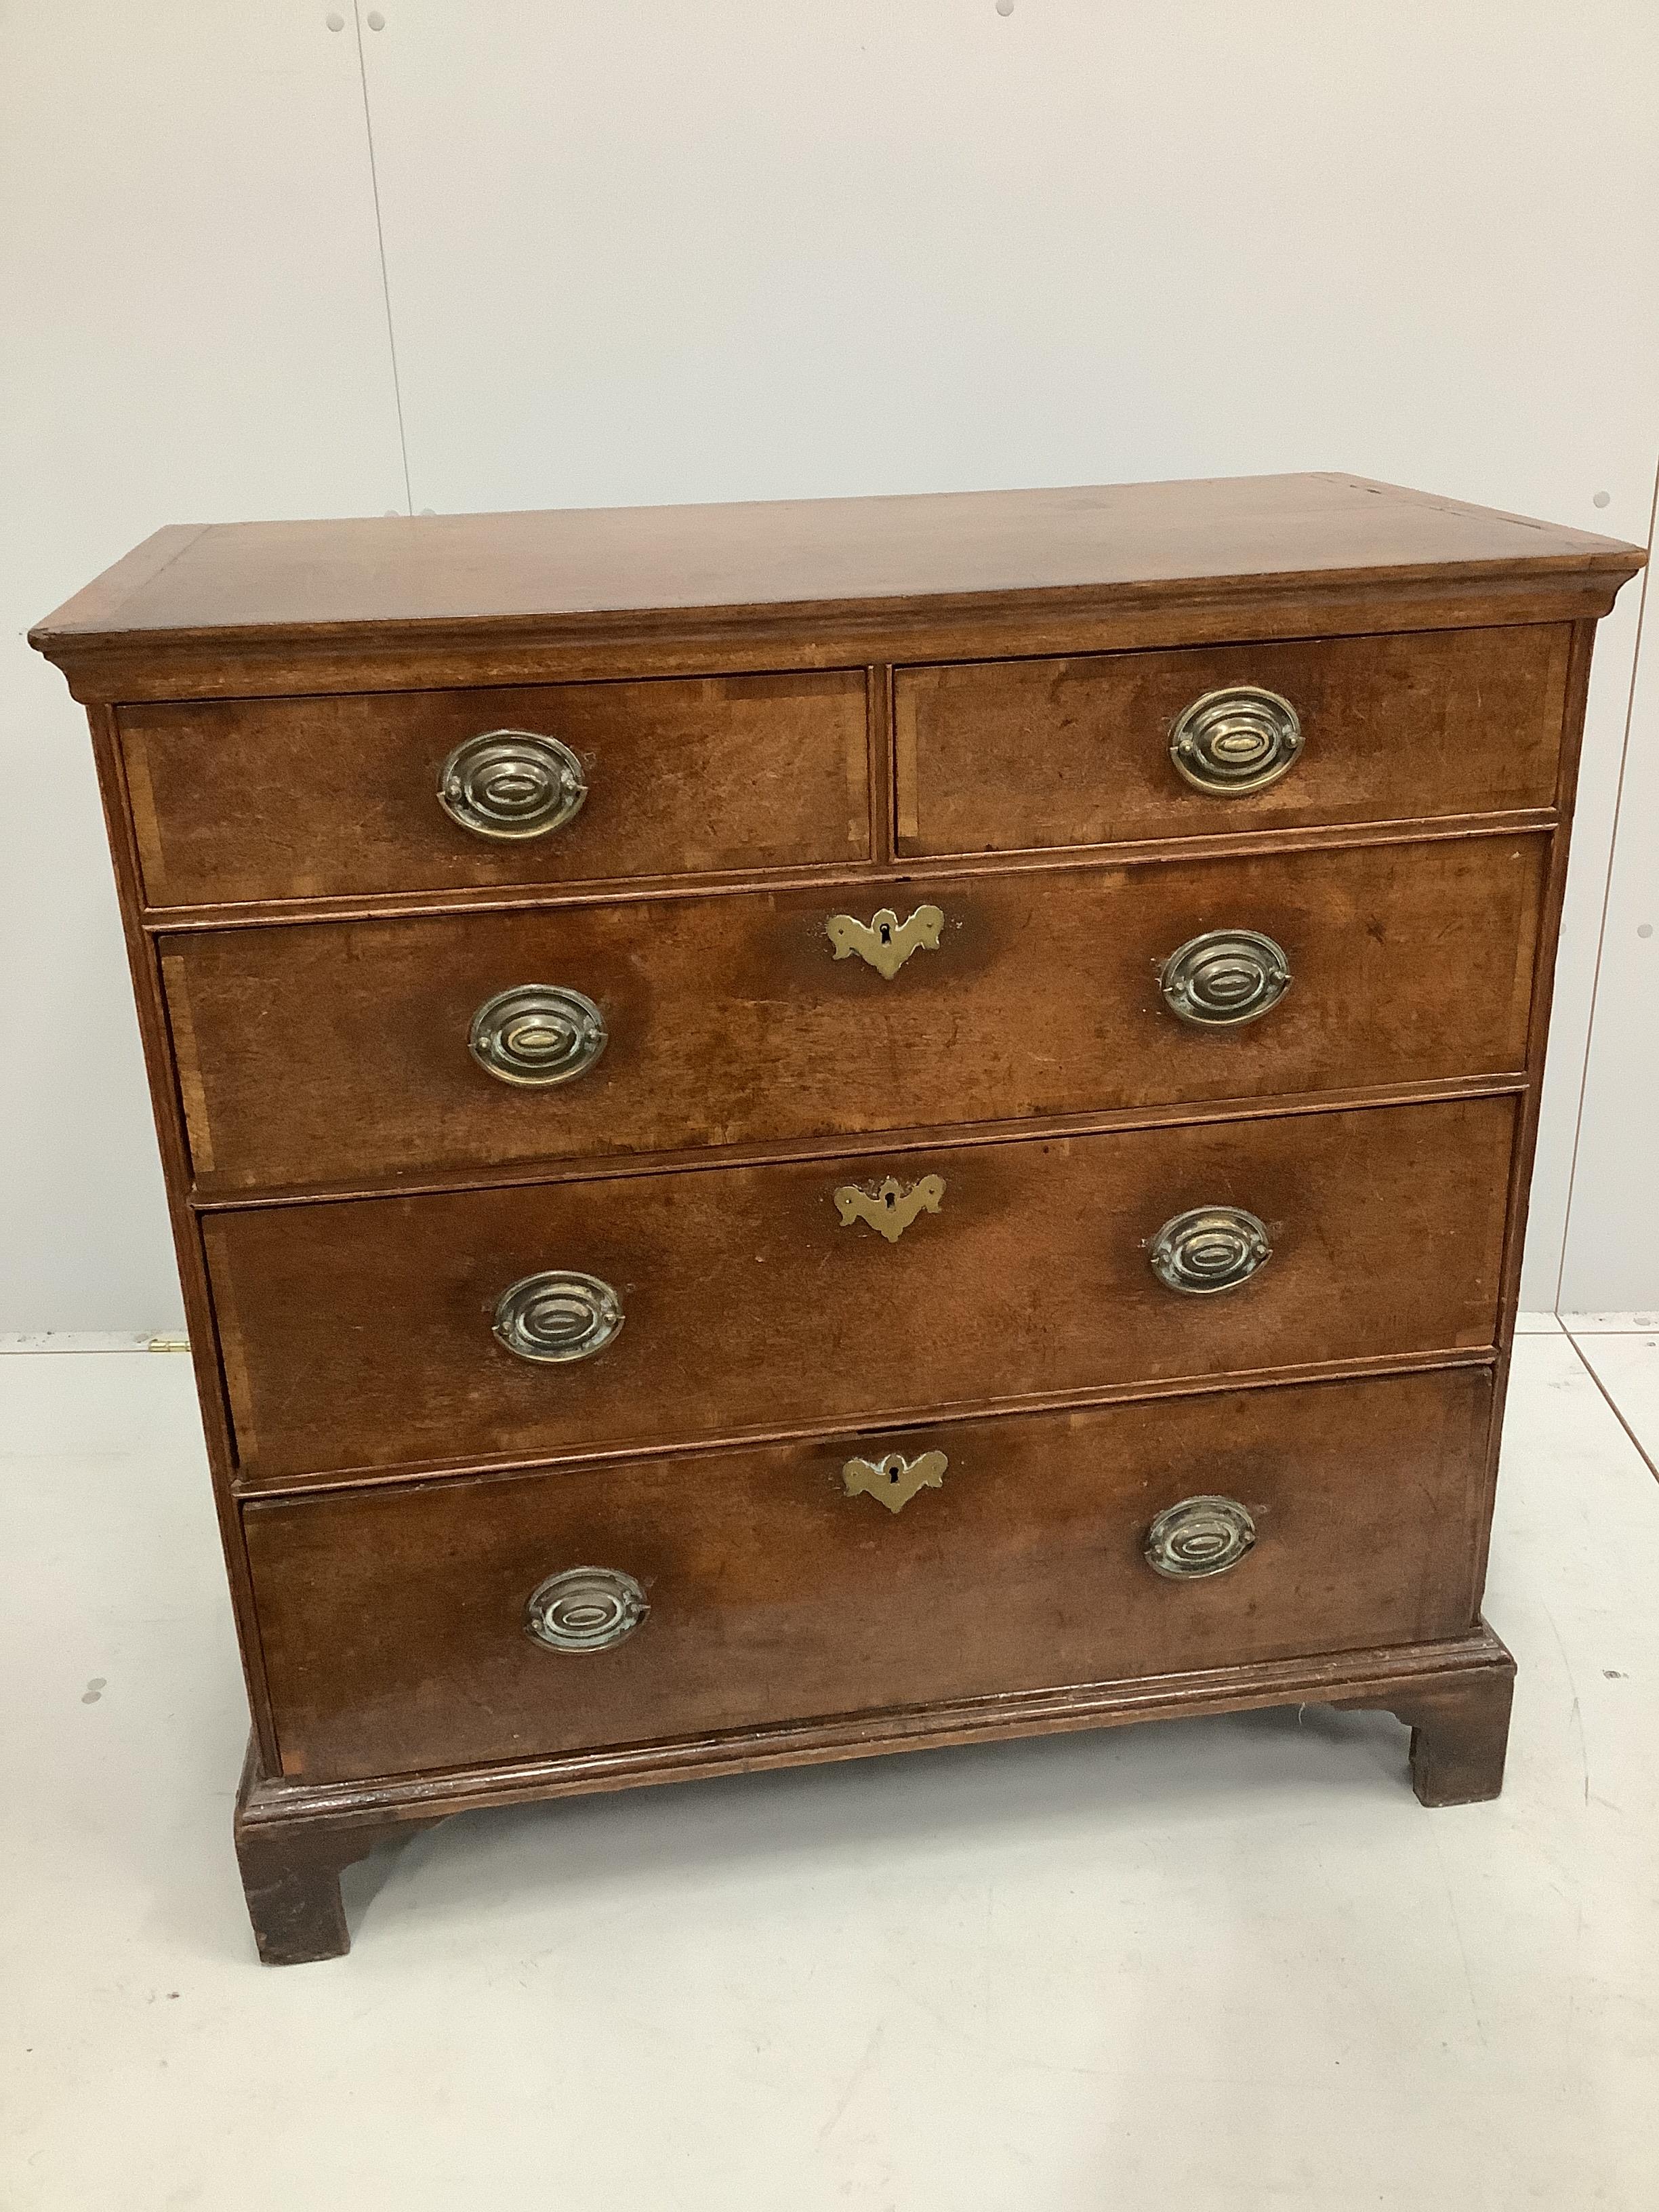 An 18th century banded oak five drawer chest, width 94cm, depth 51cm, height 95cm